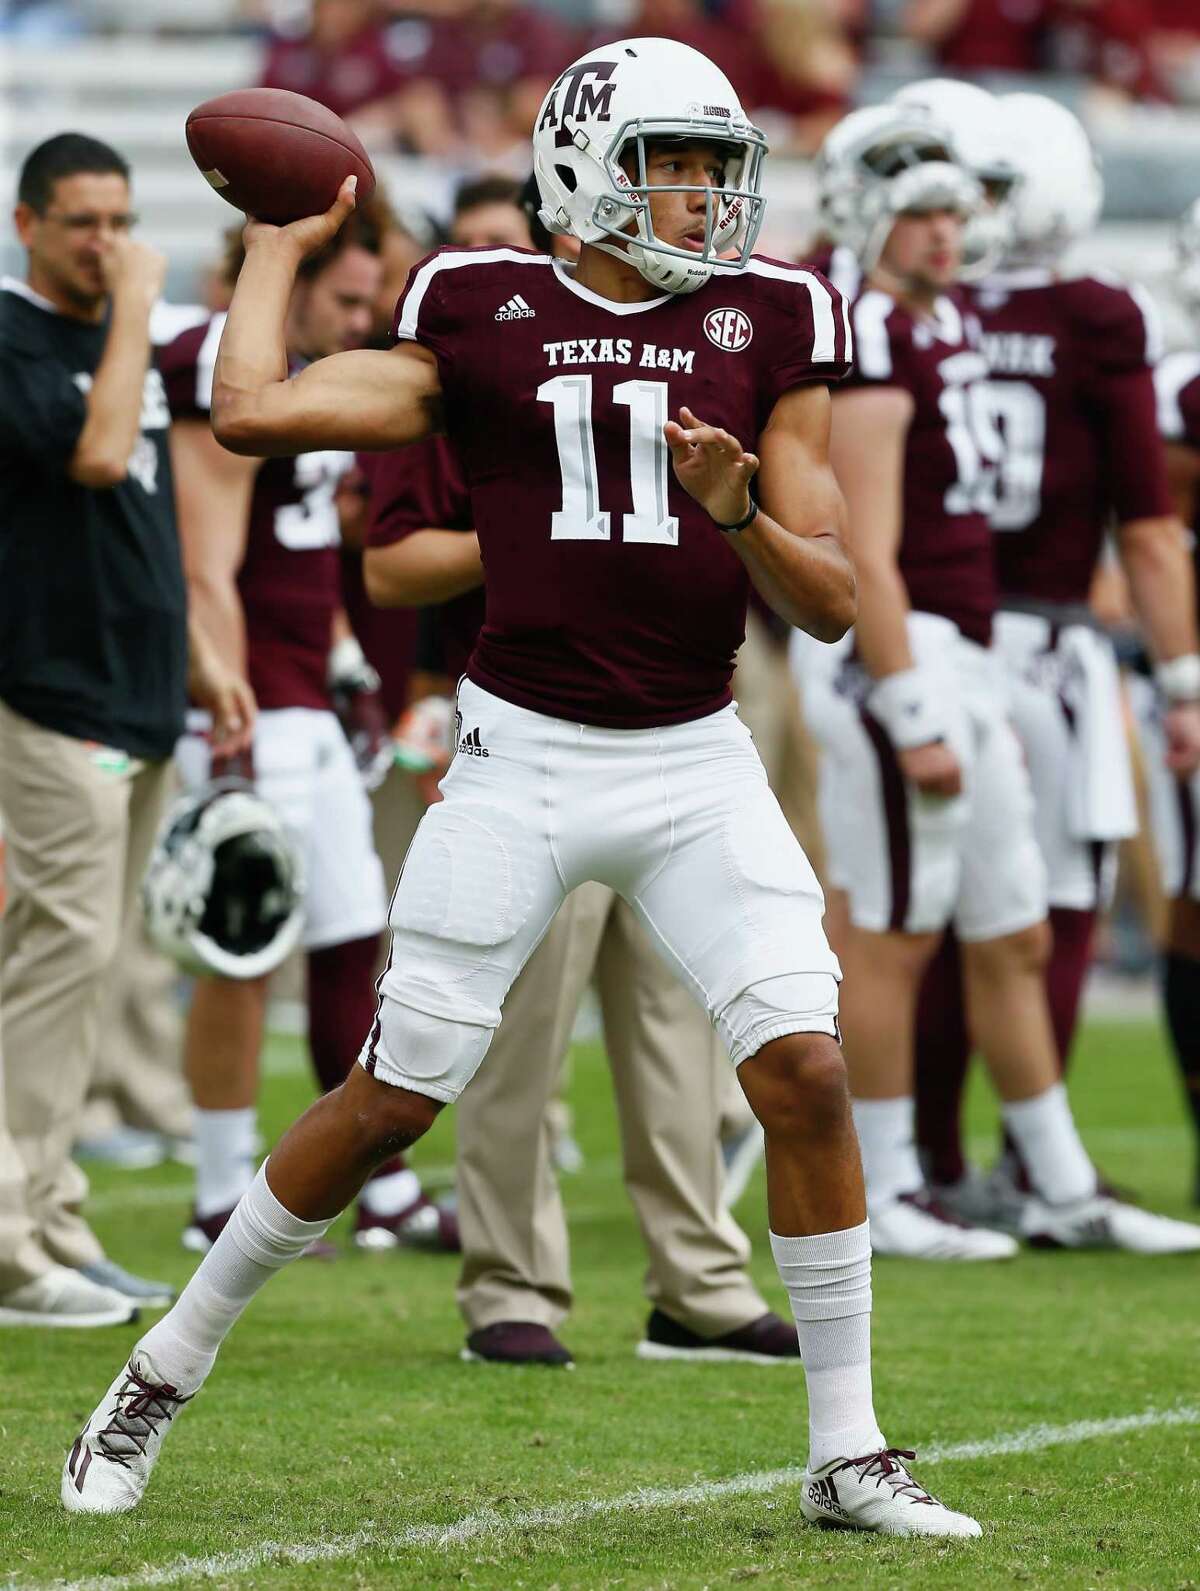 COLLEGE STATION, TX - NOVEMBER 04: Kellen Mond #11 of the Texas A&M Aggies warms up before their game against the Auburn Tigers at Kyle Field on November 4, 2017 in College Station, Texas.